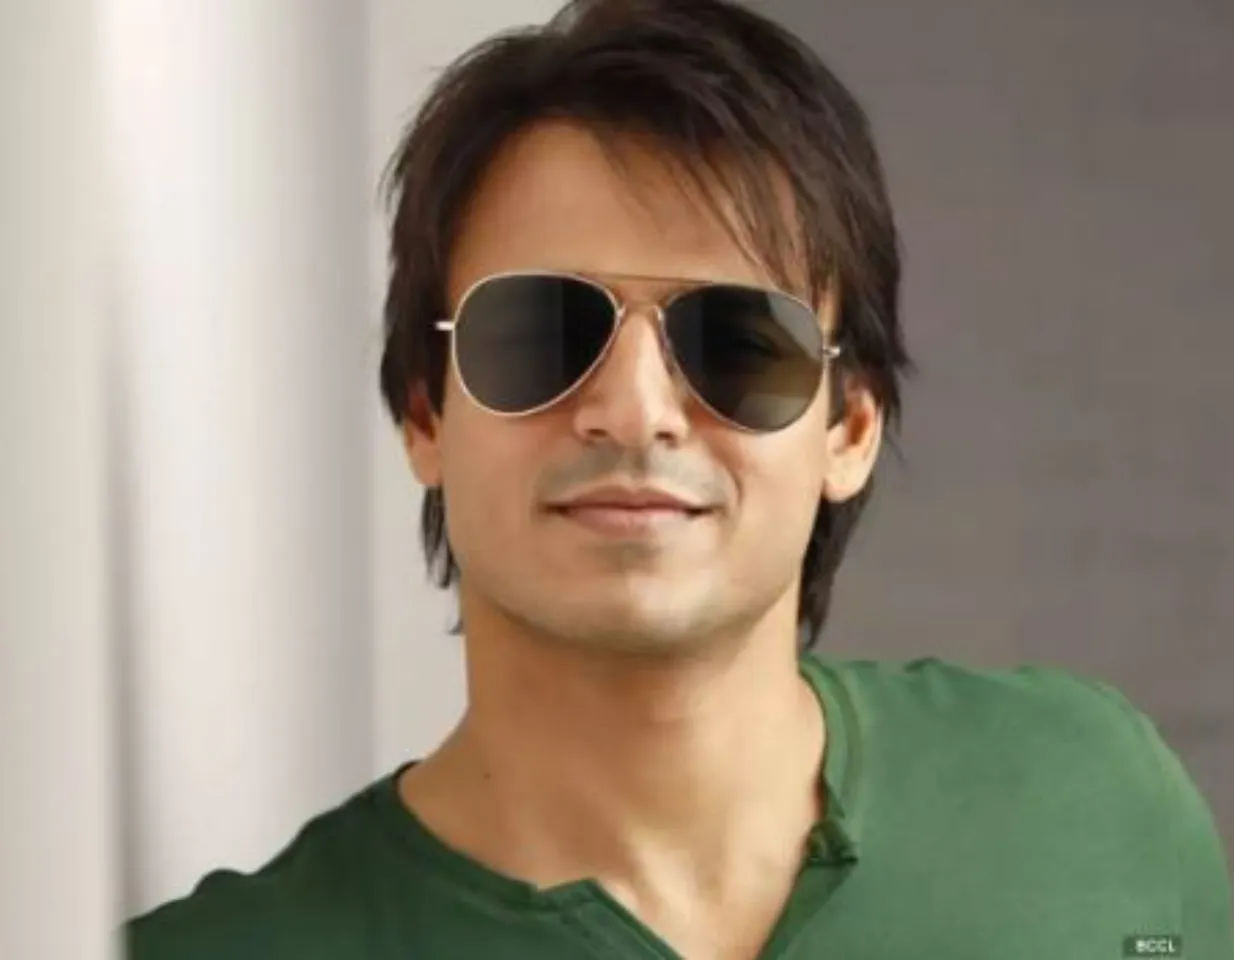 Vivek Oberoi arrived with his son in Ahmedabad due to world cup final